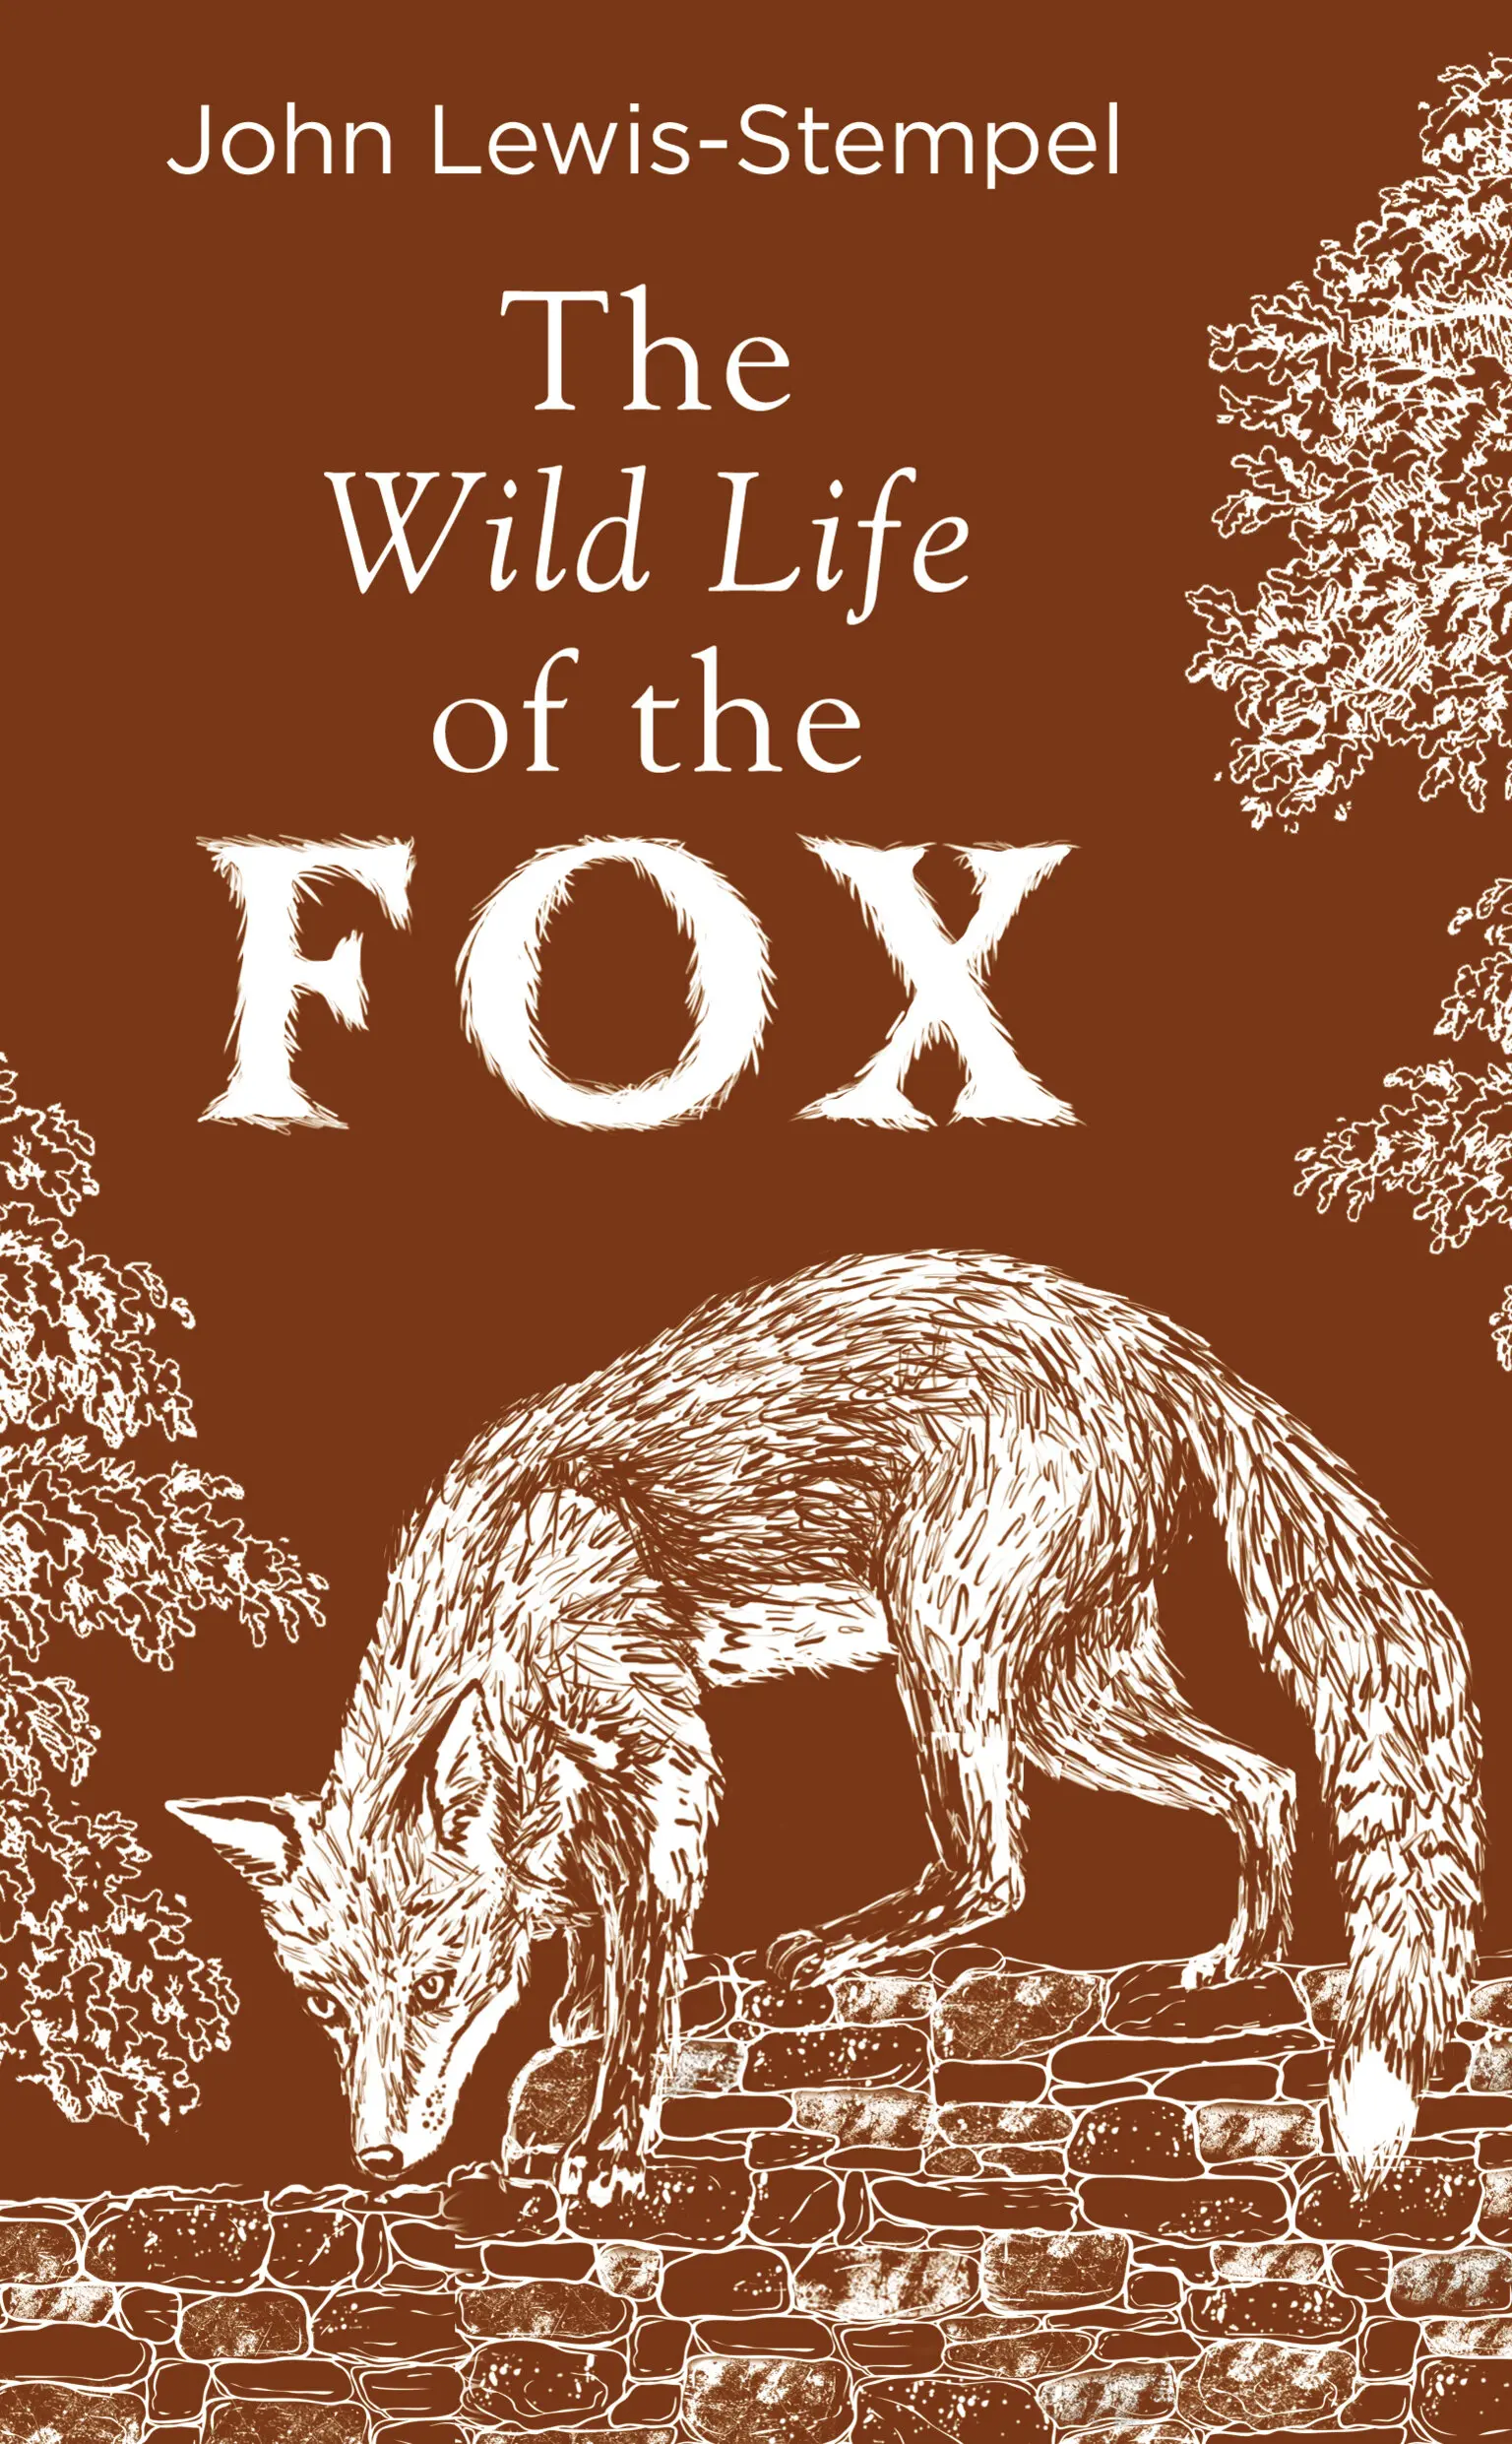 John Lewis-Stempel : Wild Life of the Fox (2020, Transworld Publishers Limited)